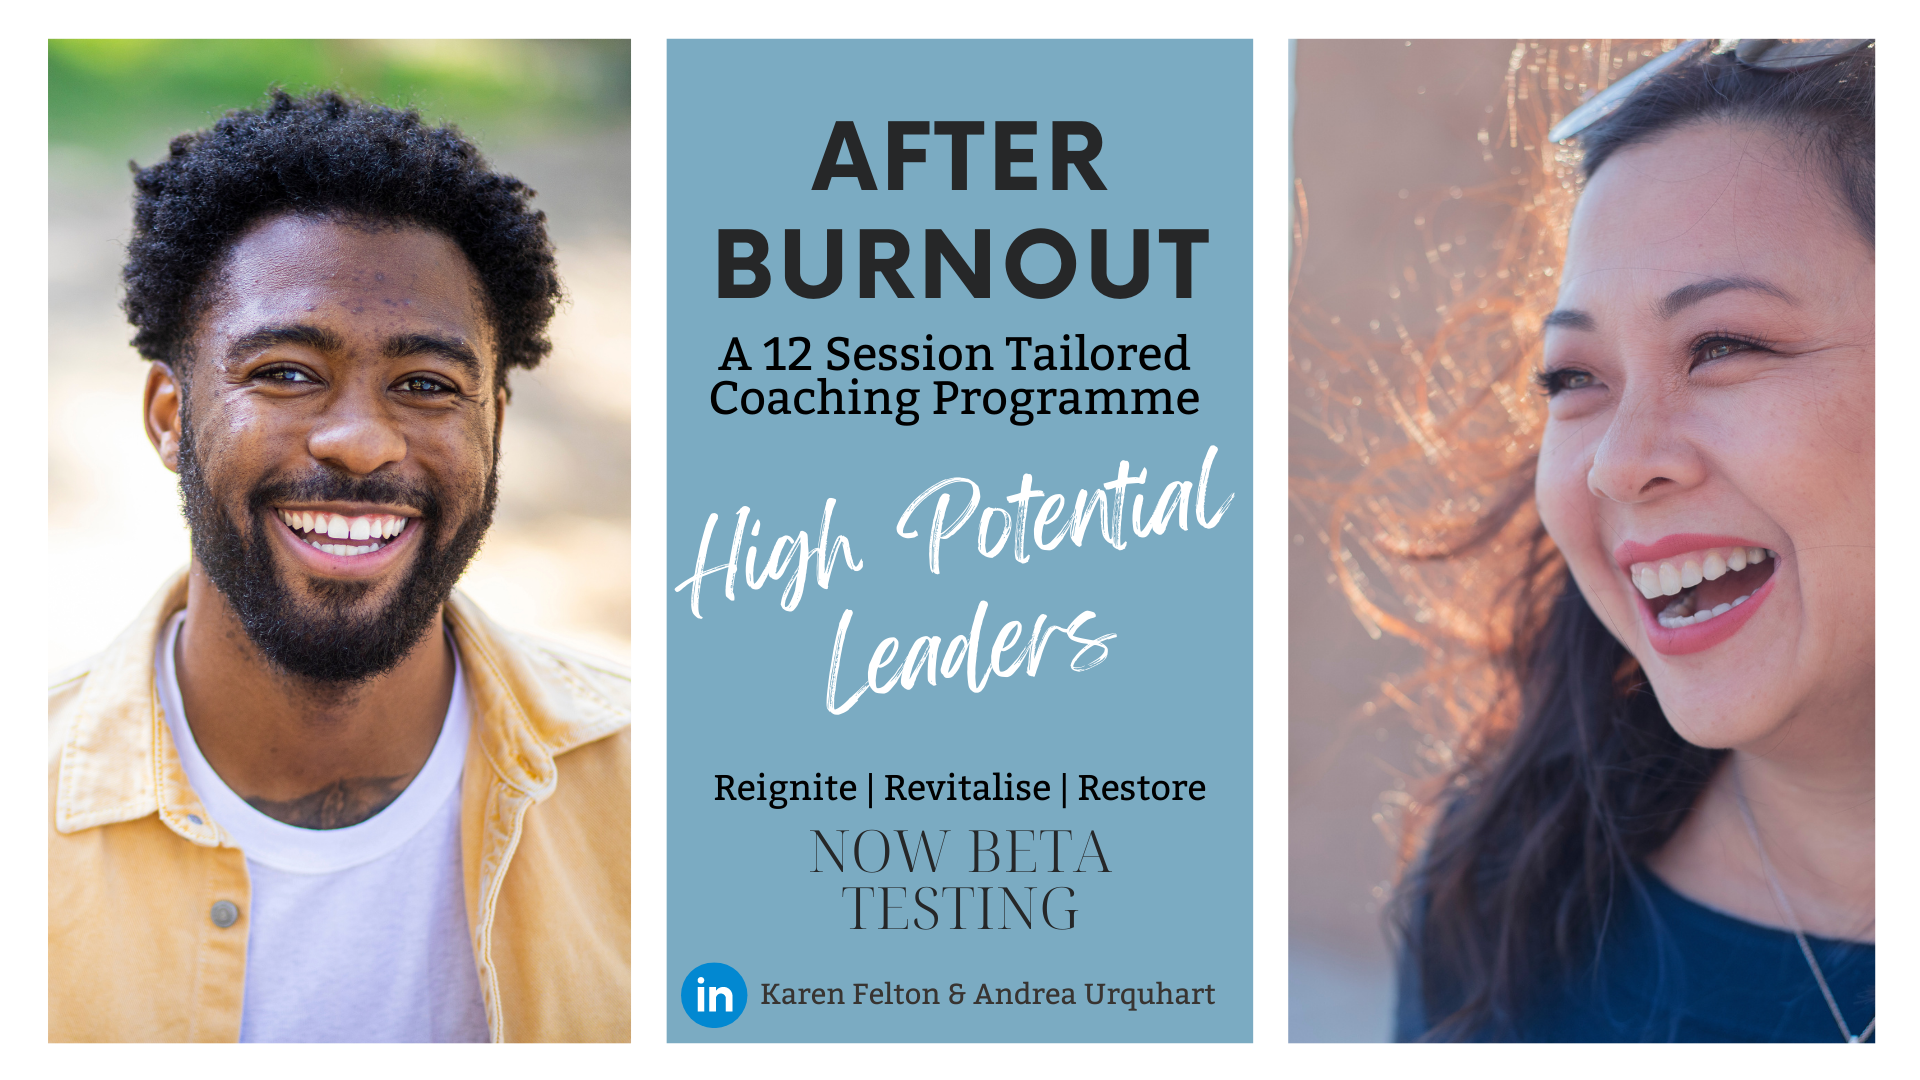 After Burnout Programme Information A picture of a man and woman relaxed and happy with text about a coaching programme for high potential leaders returning to work after burnout